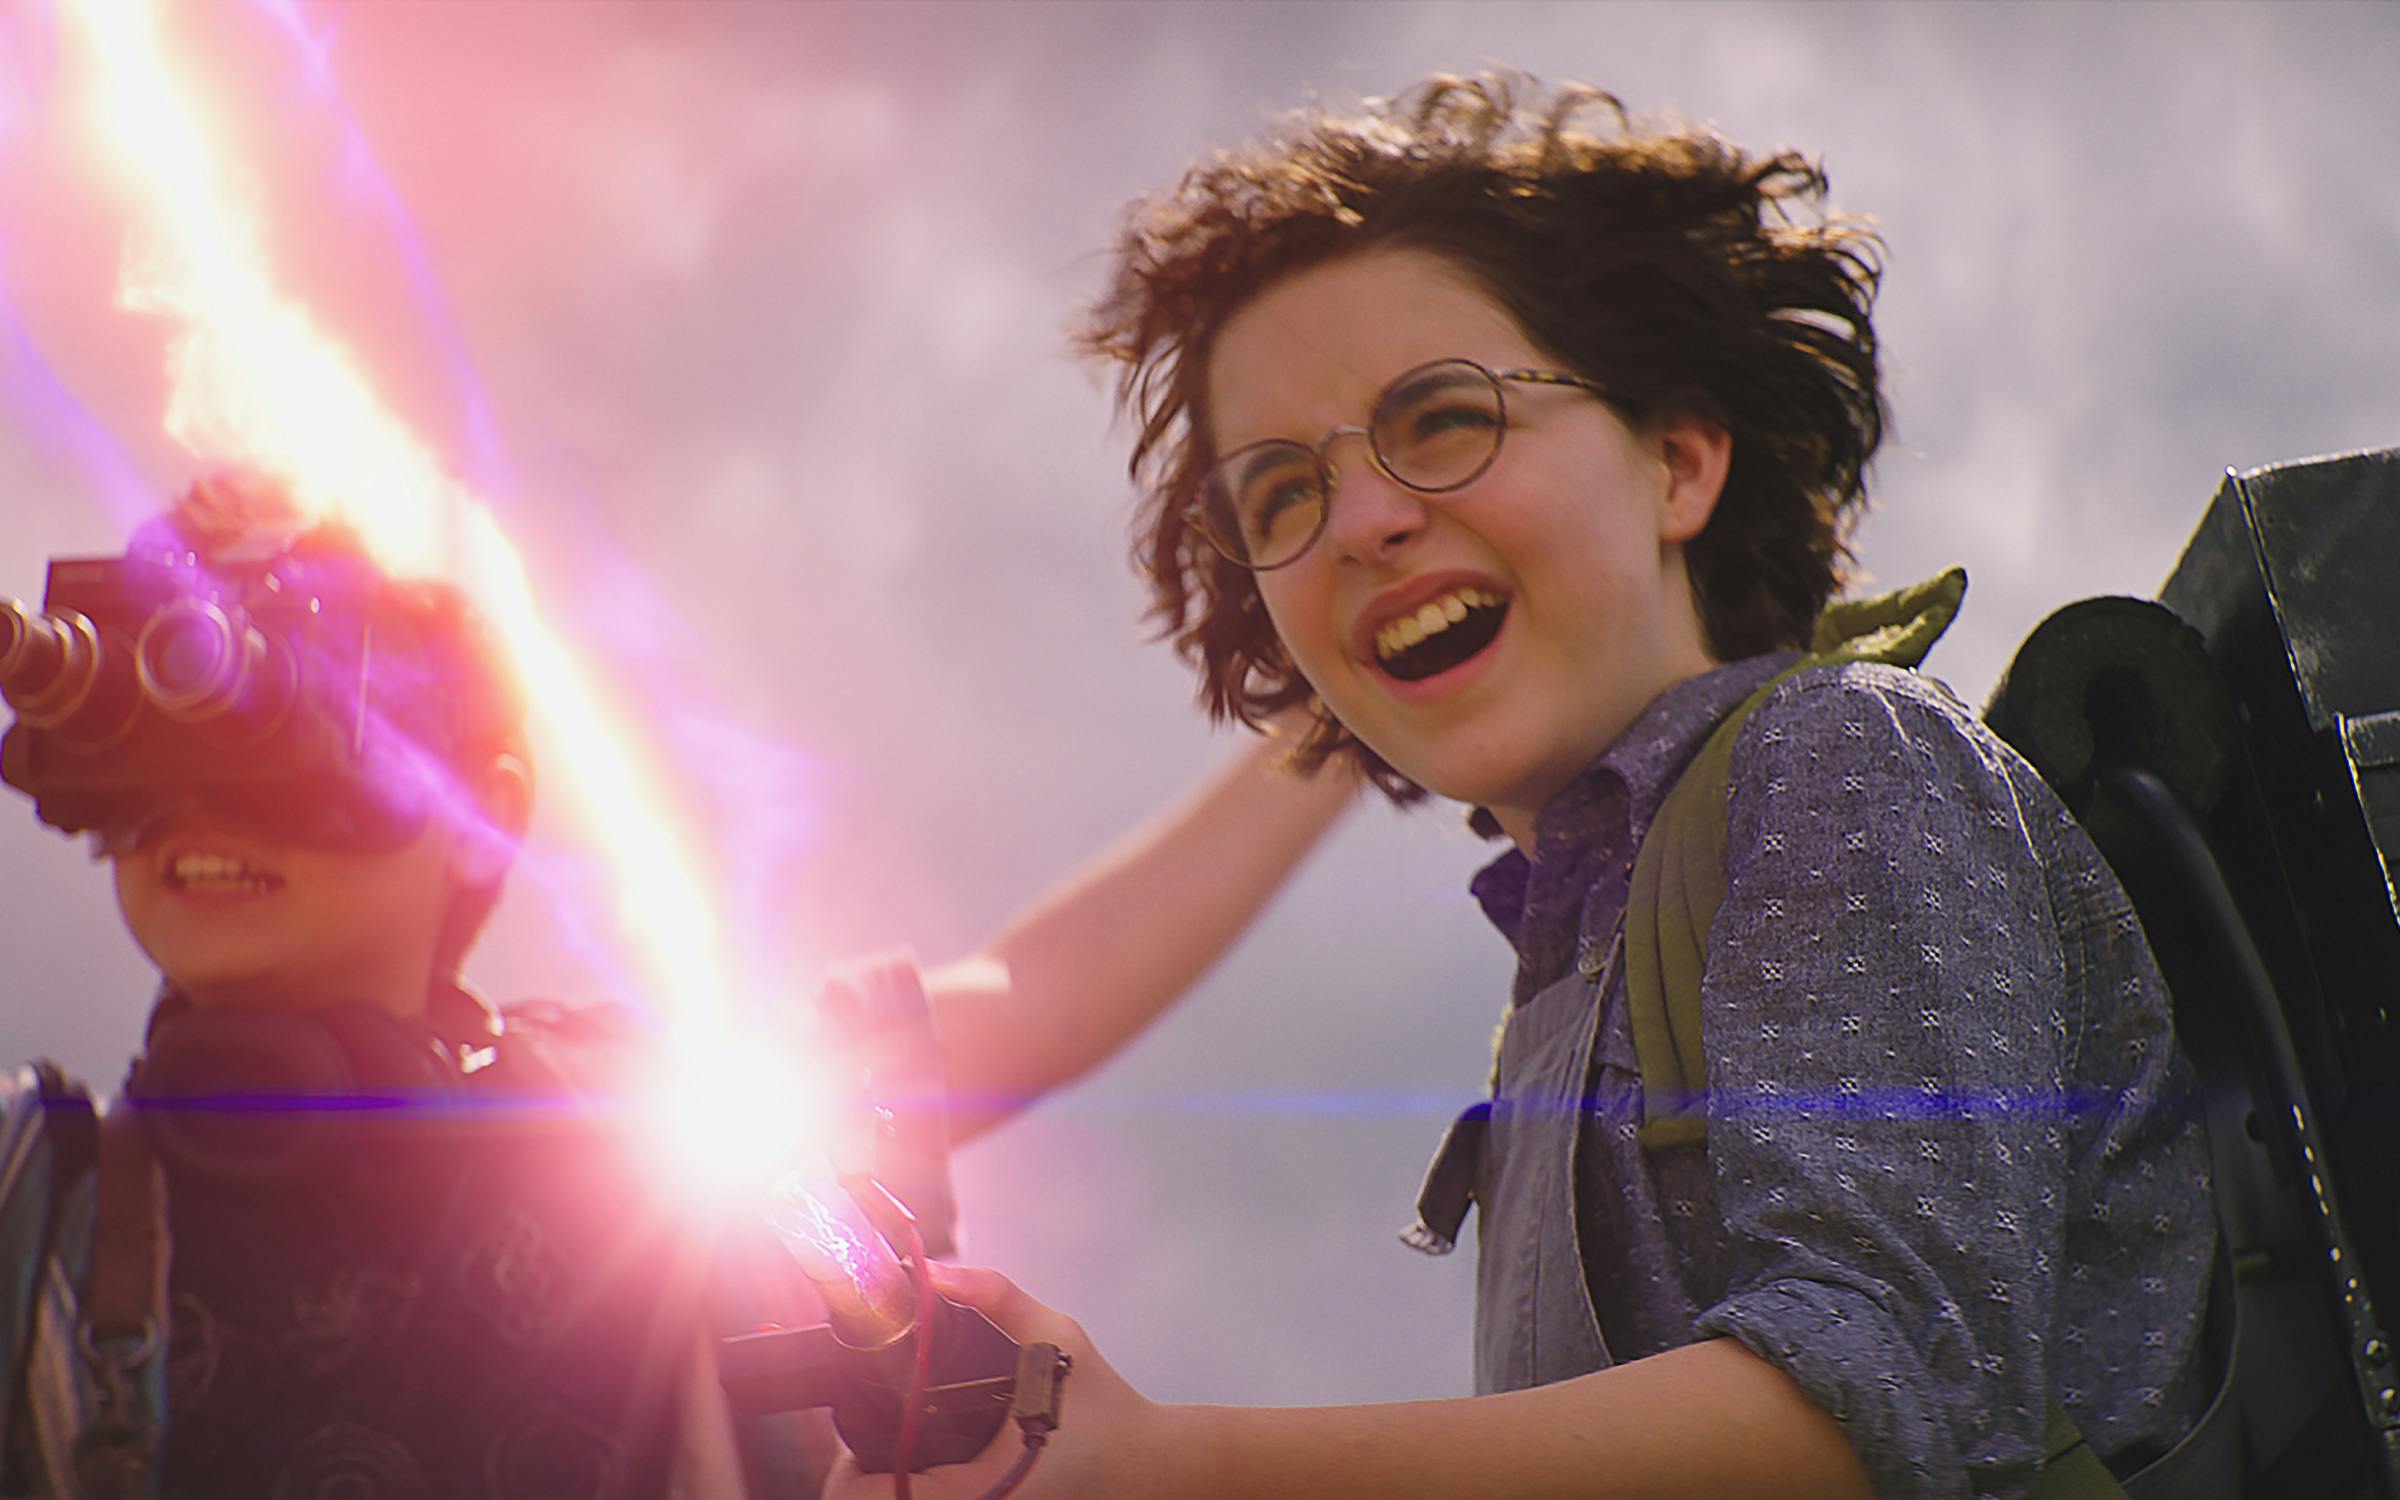 Ghostbusters Ending Explained And How It Leads To Ghostbusters: Afterlife